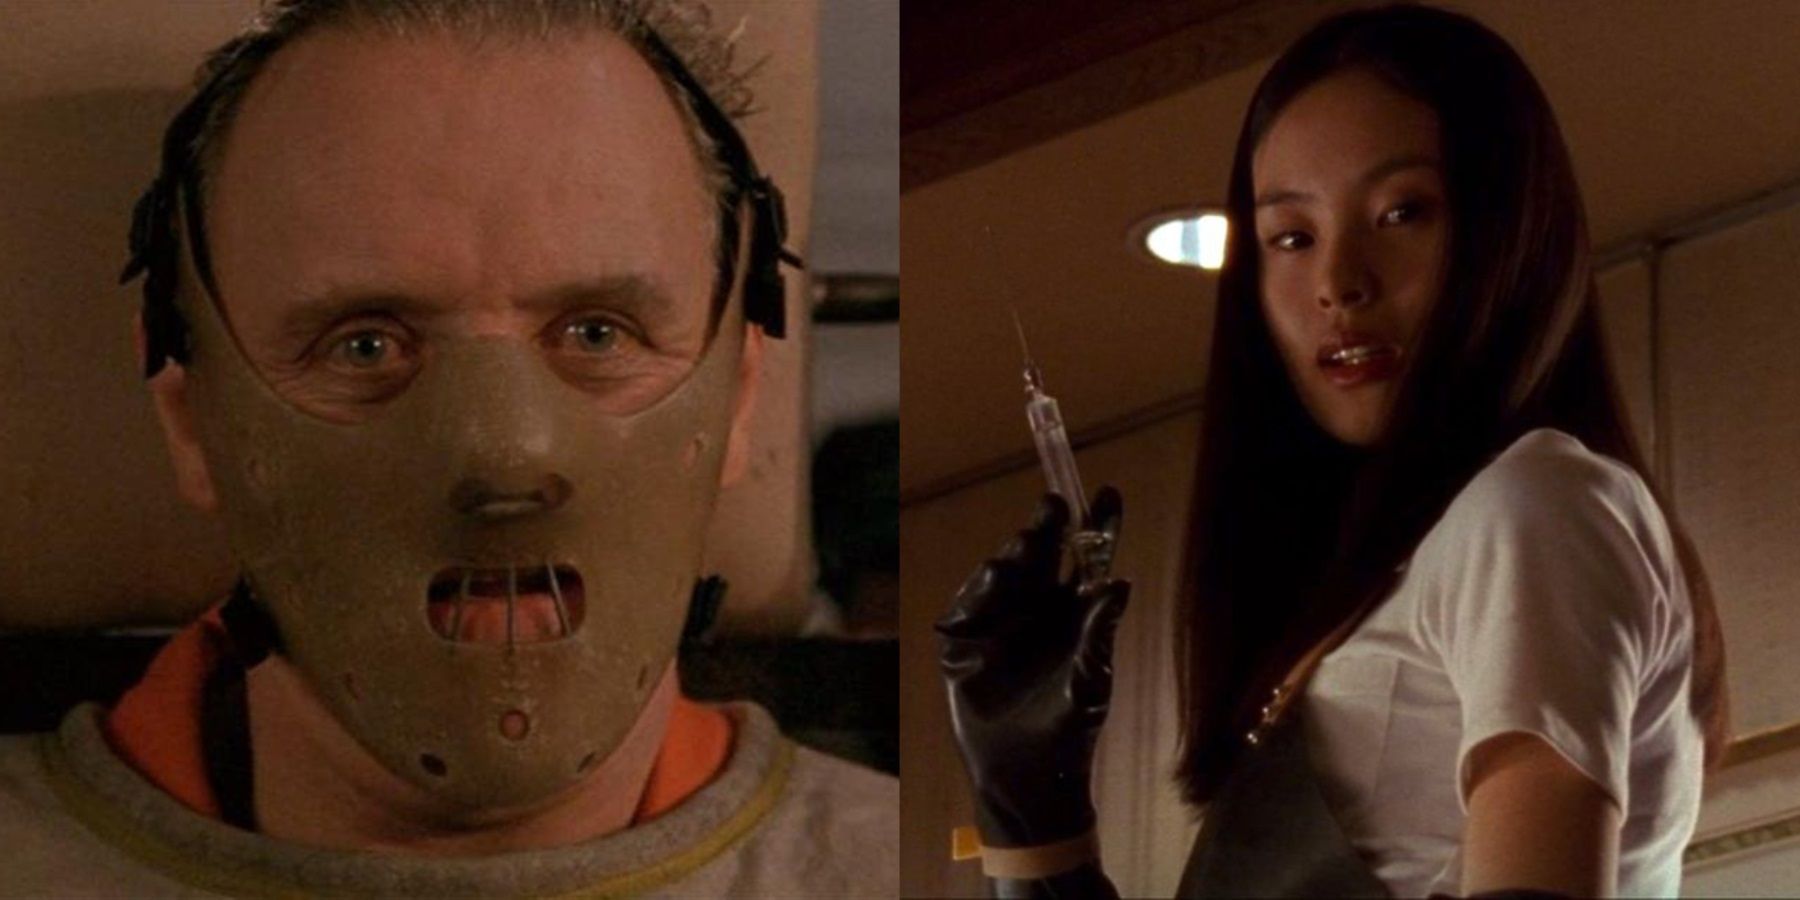 The 10 Most Interesting Horror Movie Plots From The 1990s